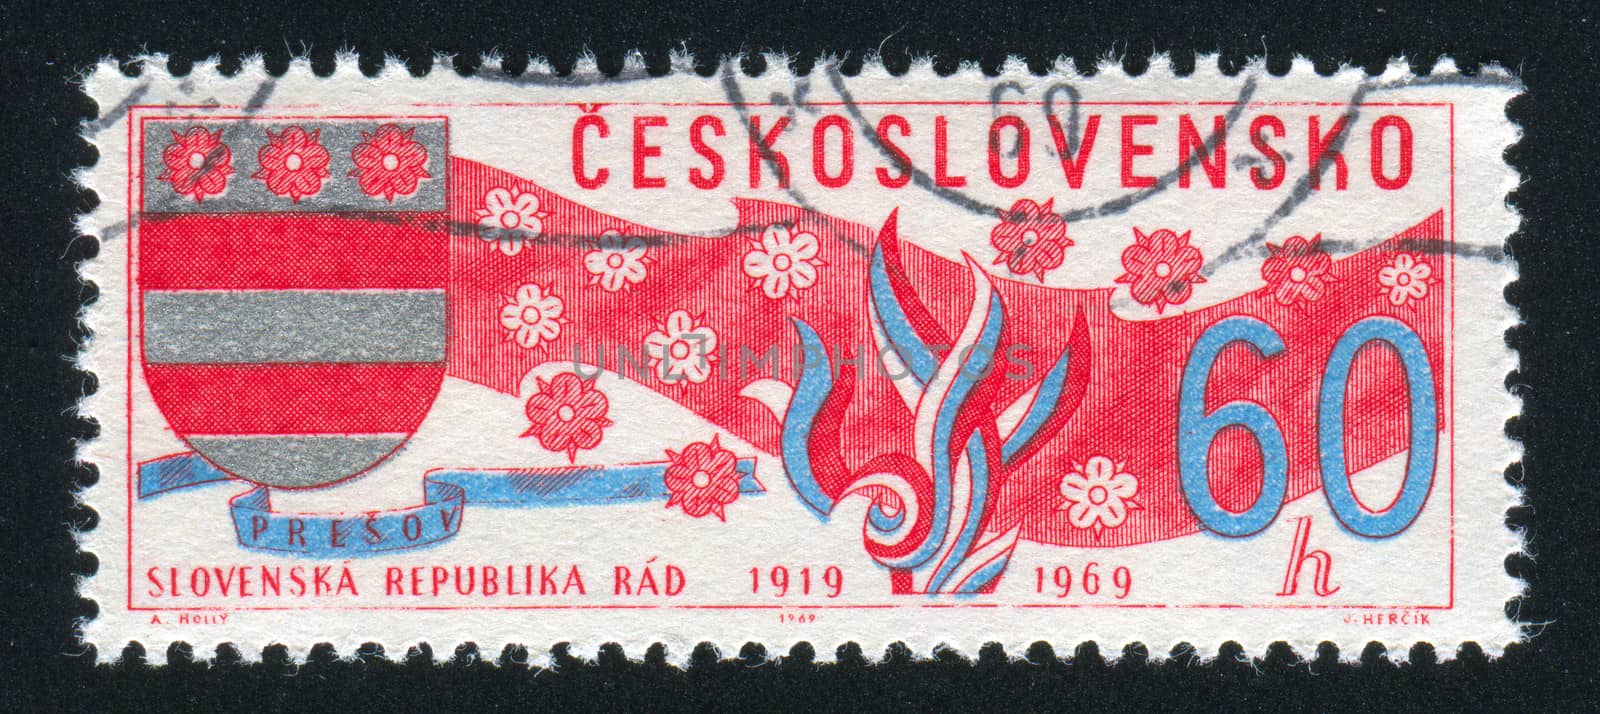 CZECHOSLOVAKIA - CIRCA 1969: stamp printed by Czechoslovakia, shows Arms of Slovakia, banner and blossoms, circa 1969